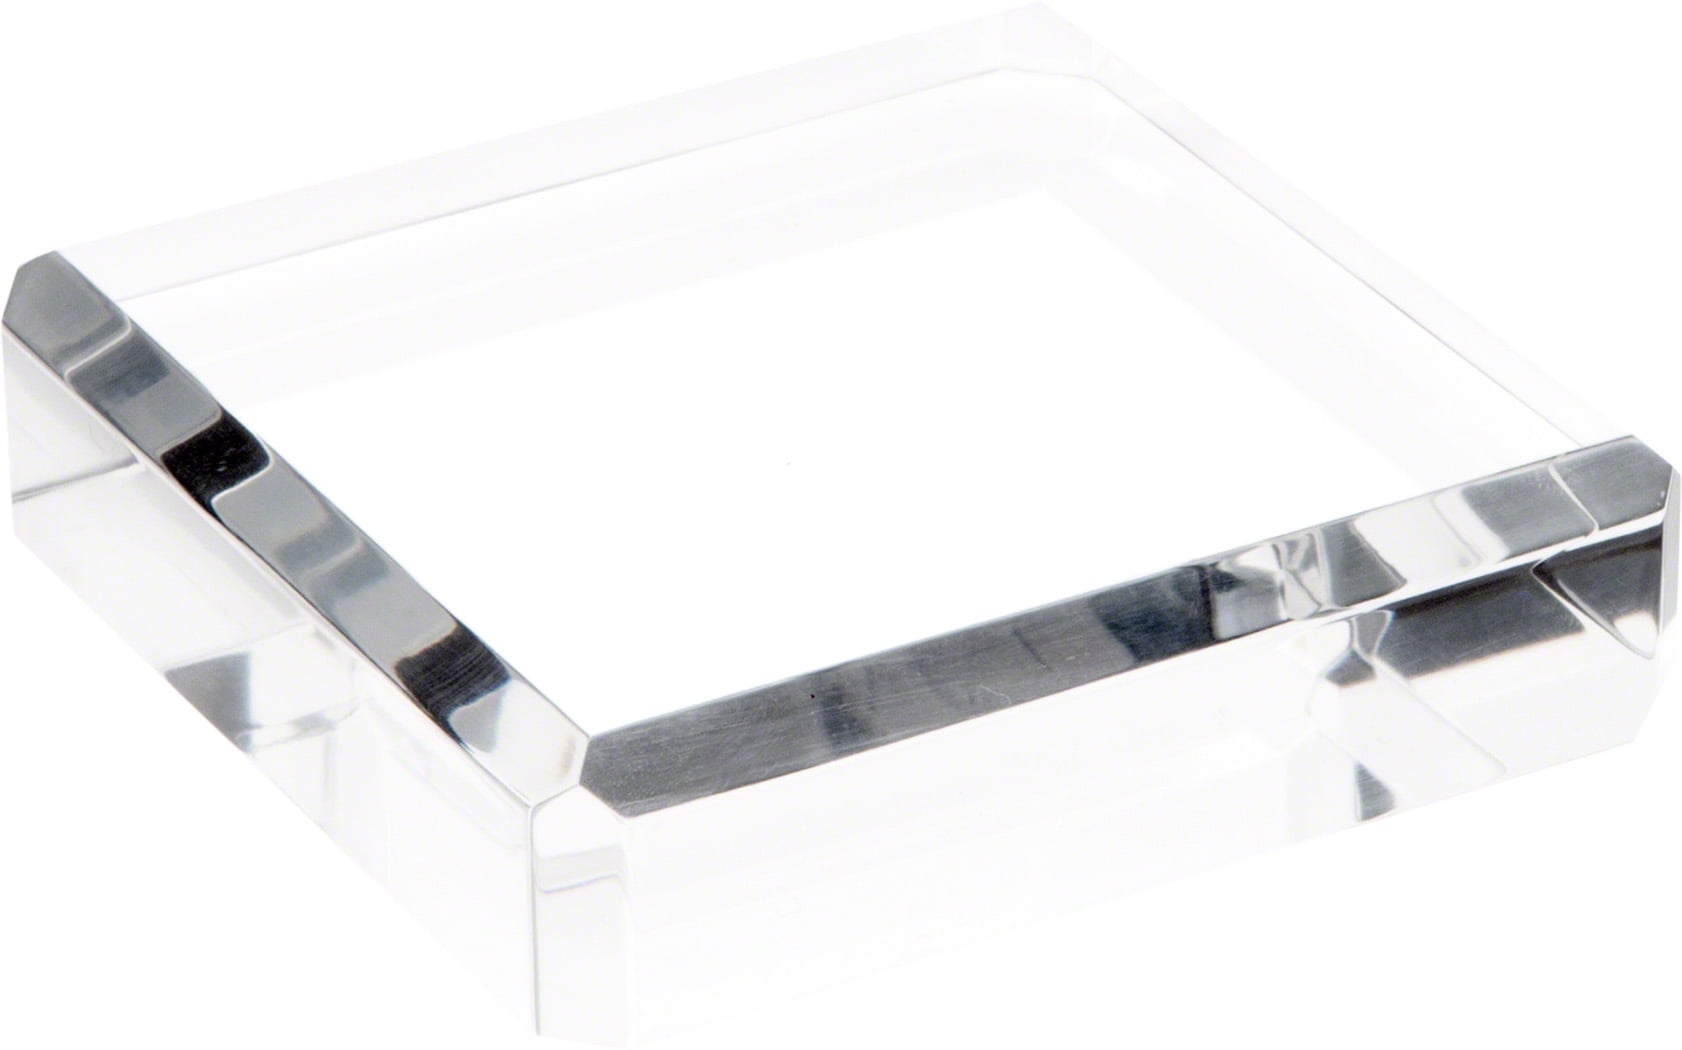 Acrylic Display Stand Block Base with Beveled Edge 3 Pack 